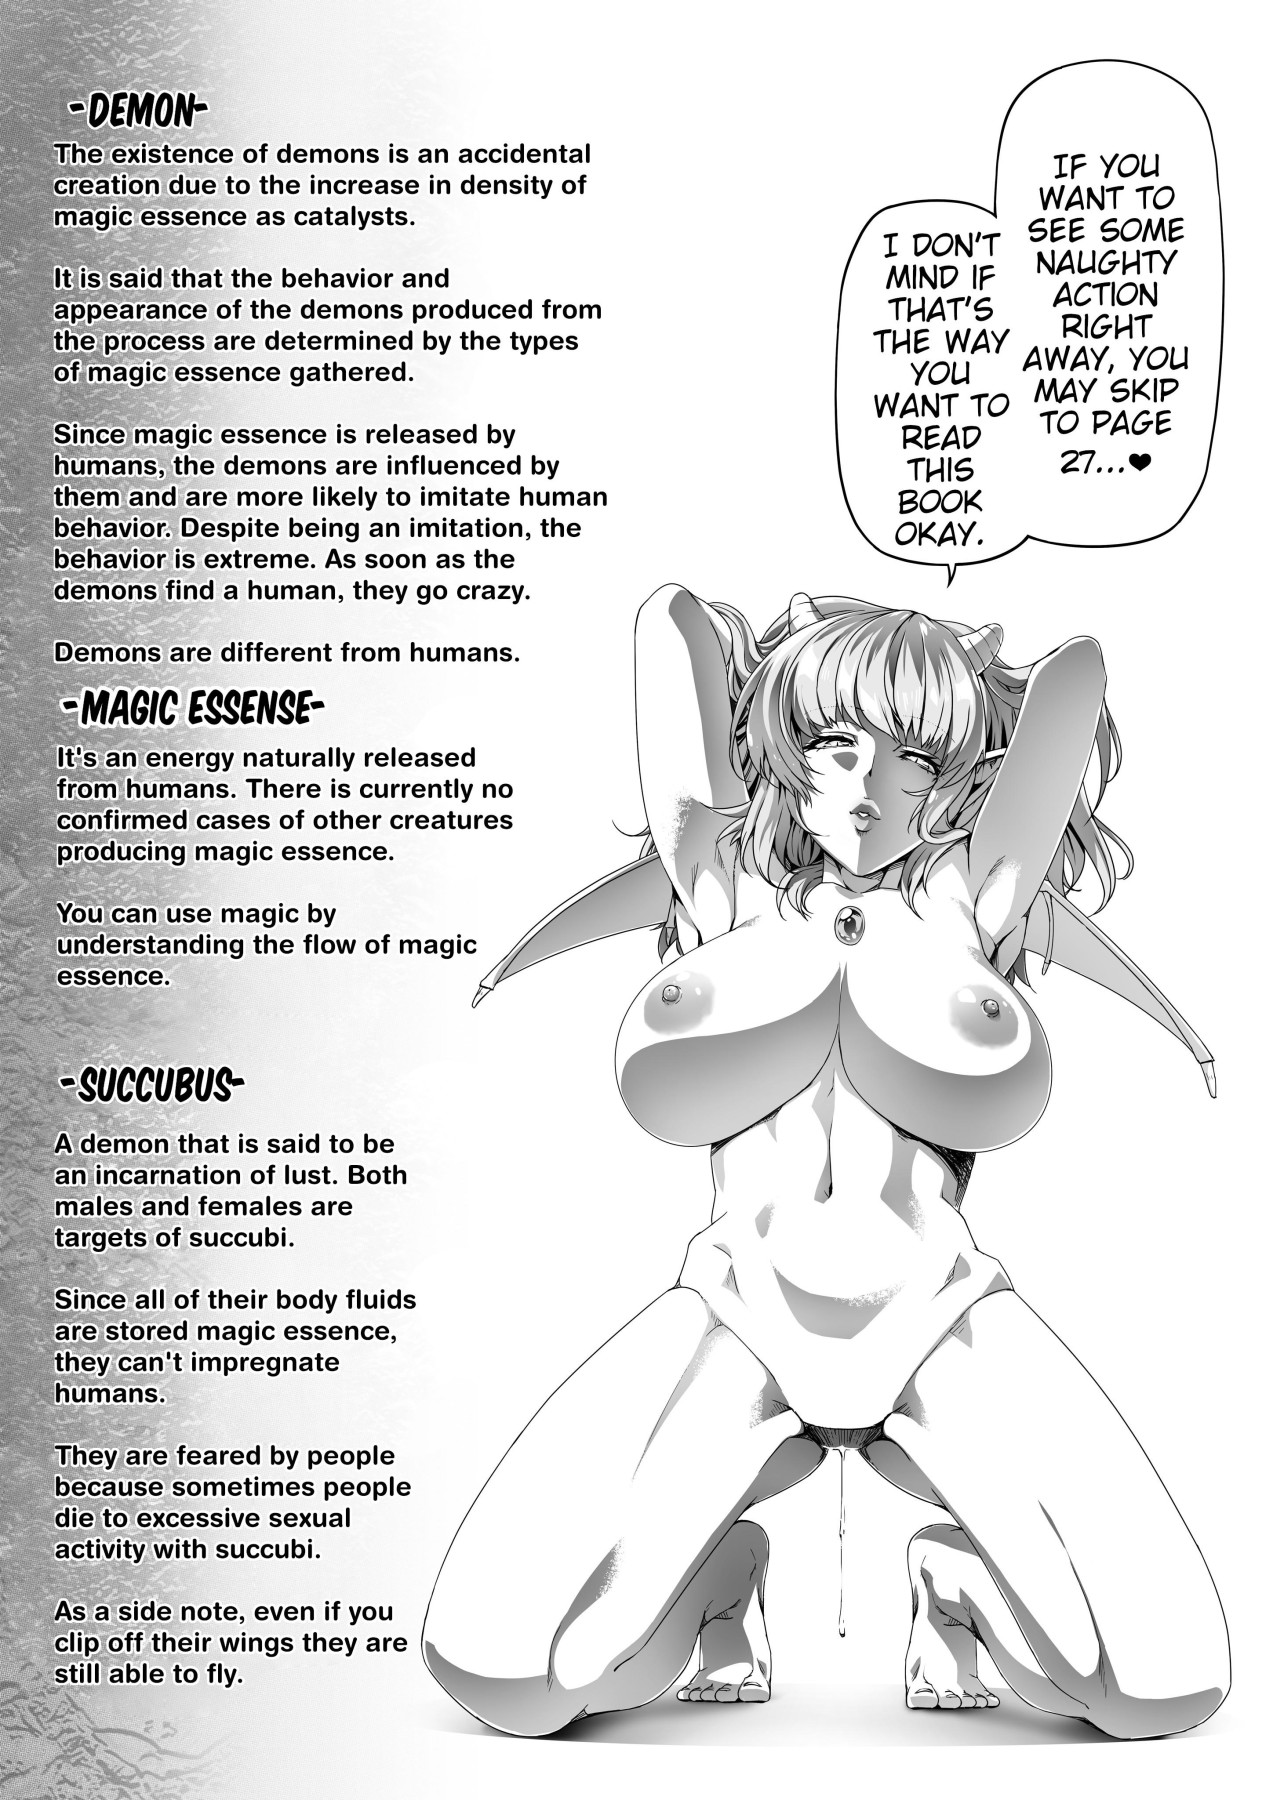 Hentai Manga Comic-A Powerful Succubus That Just Wants To Satisfy Your Sexual Desire-Read-2